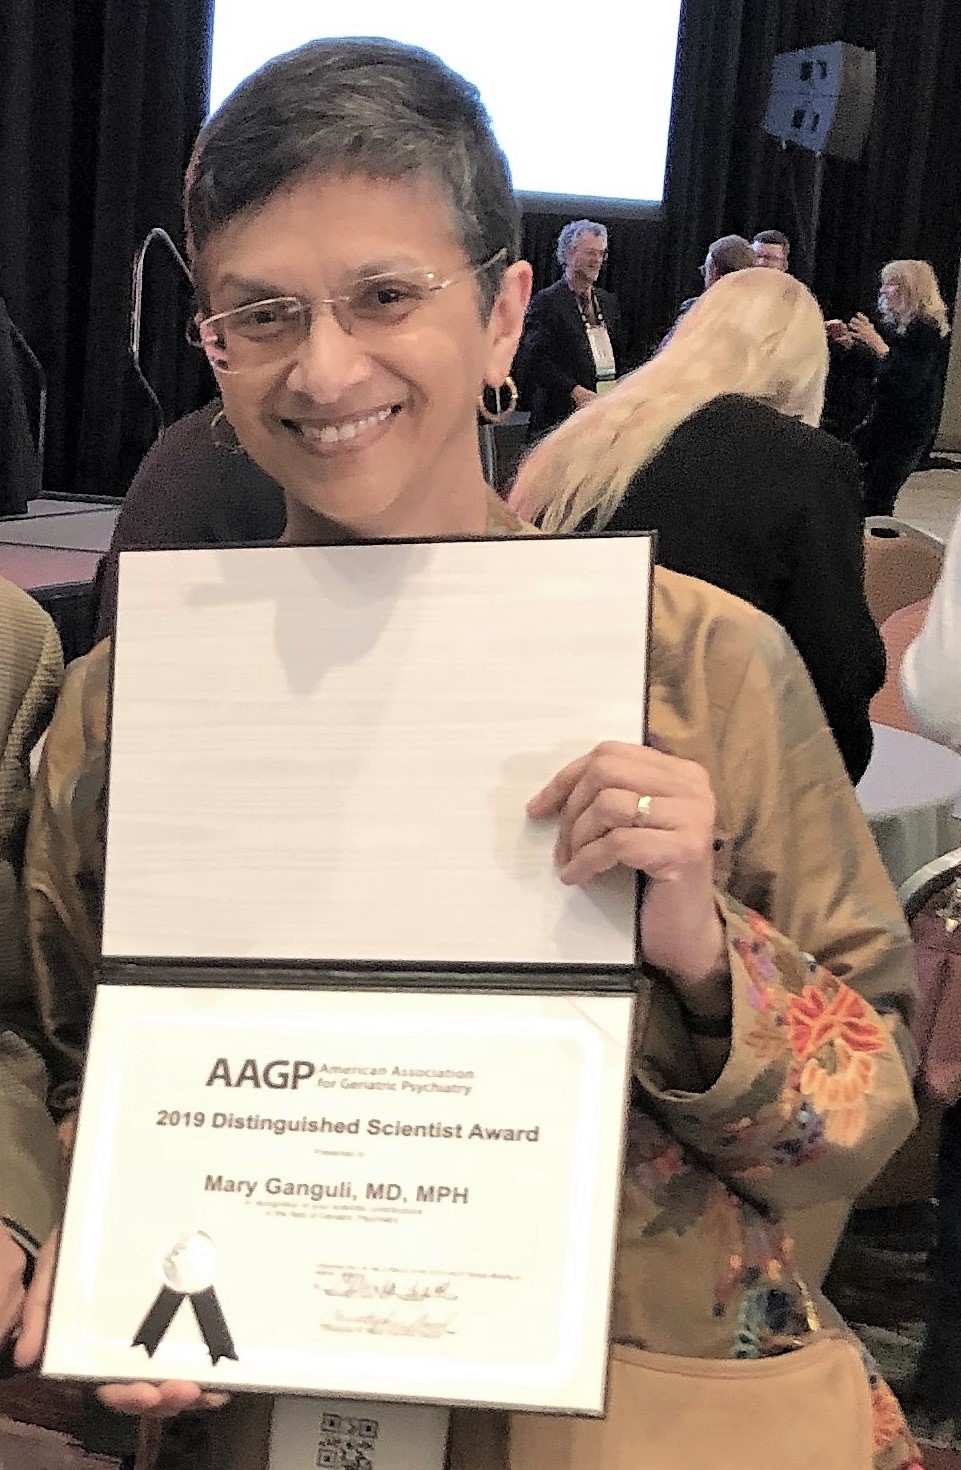 Dr. Mary Ganguli was presented with the 2019 AAGP Distinguished Scientist Award